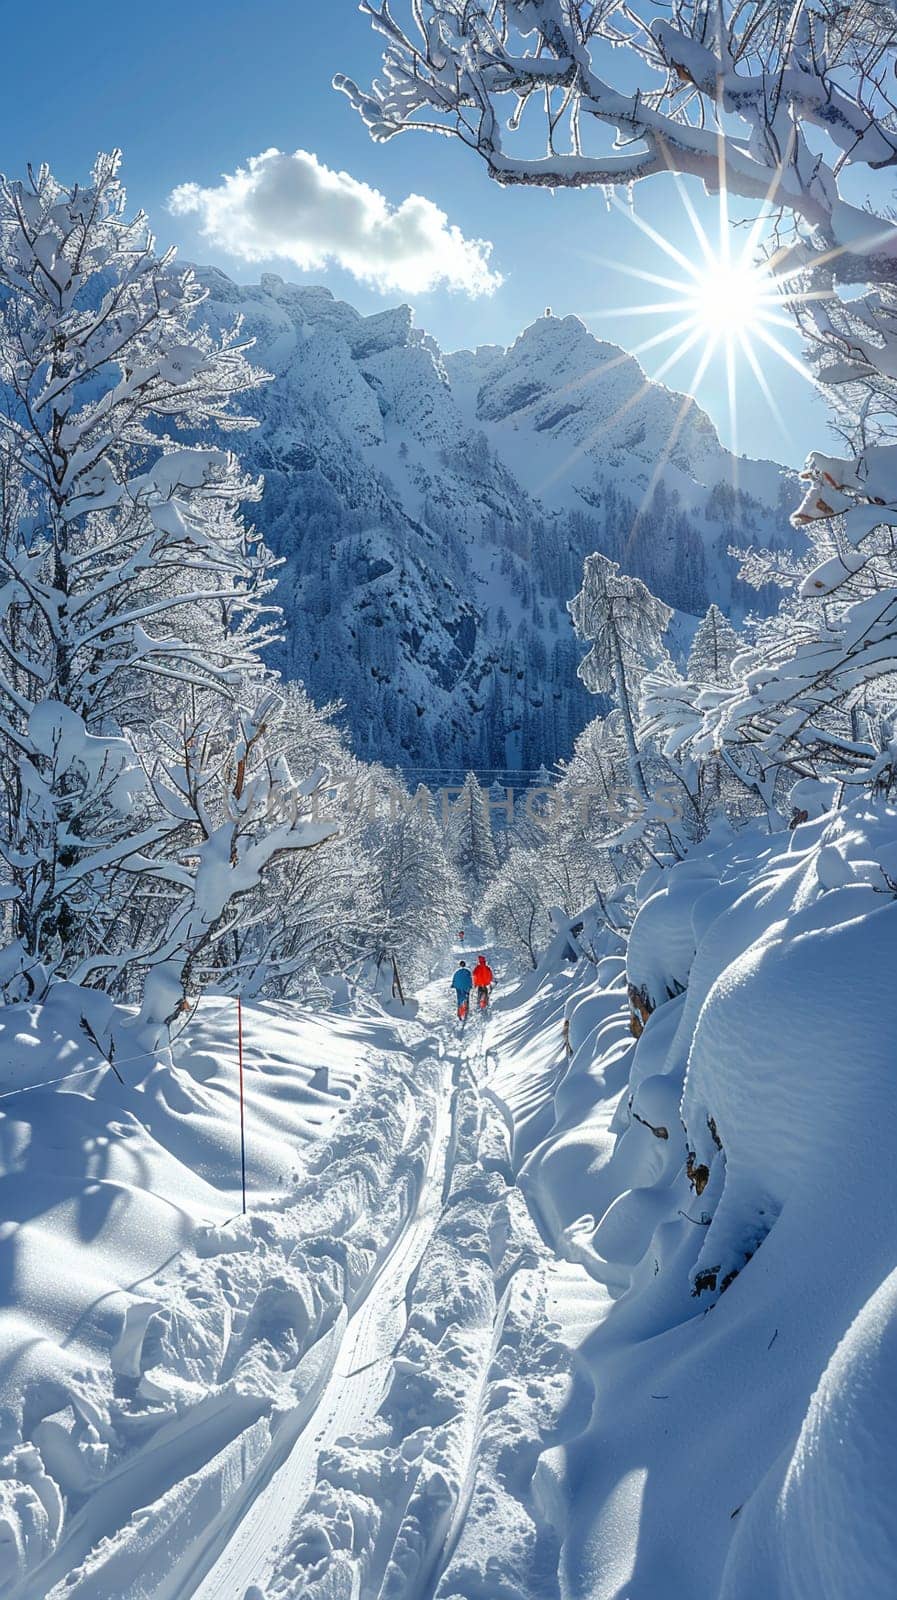 Cross-country skiing through a winter wonderland, embodying endurance and beauty.